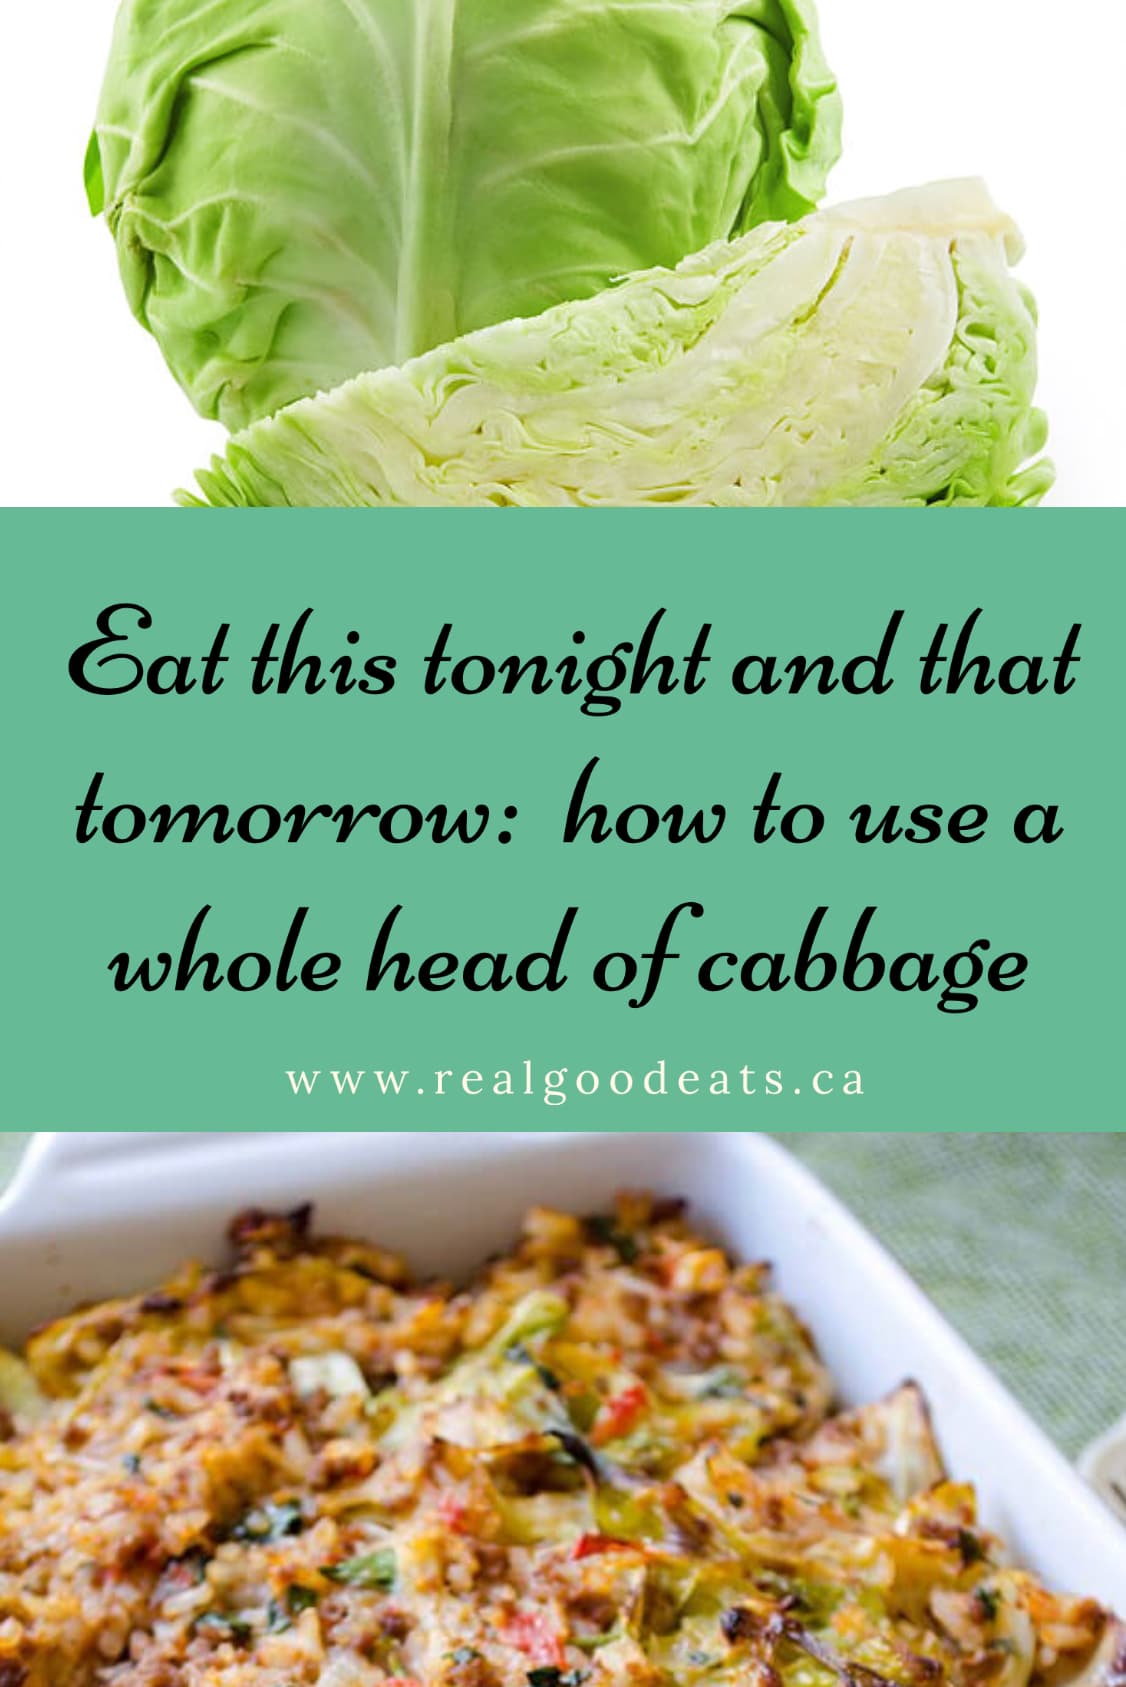 Quick and Healthy Recipes Using Cabbage